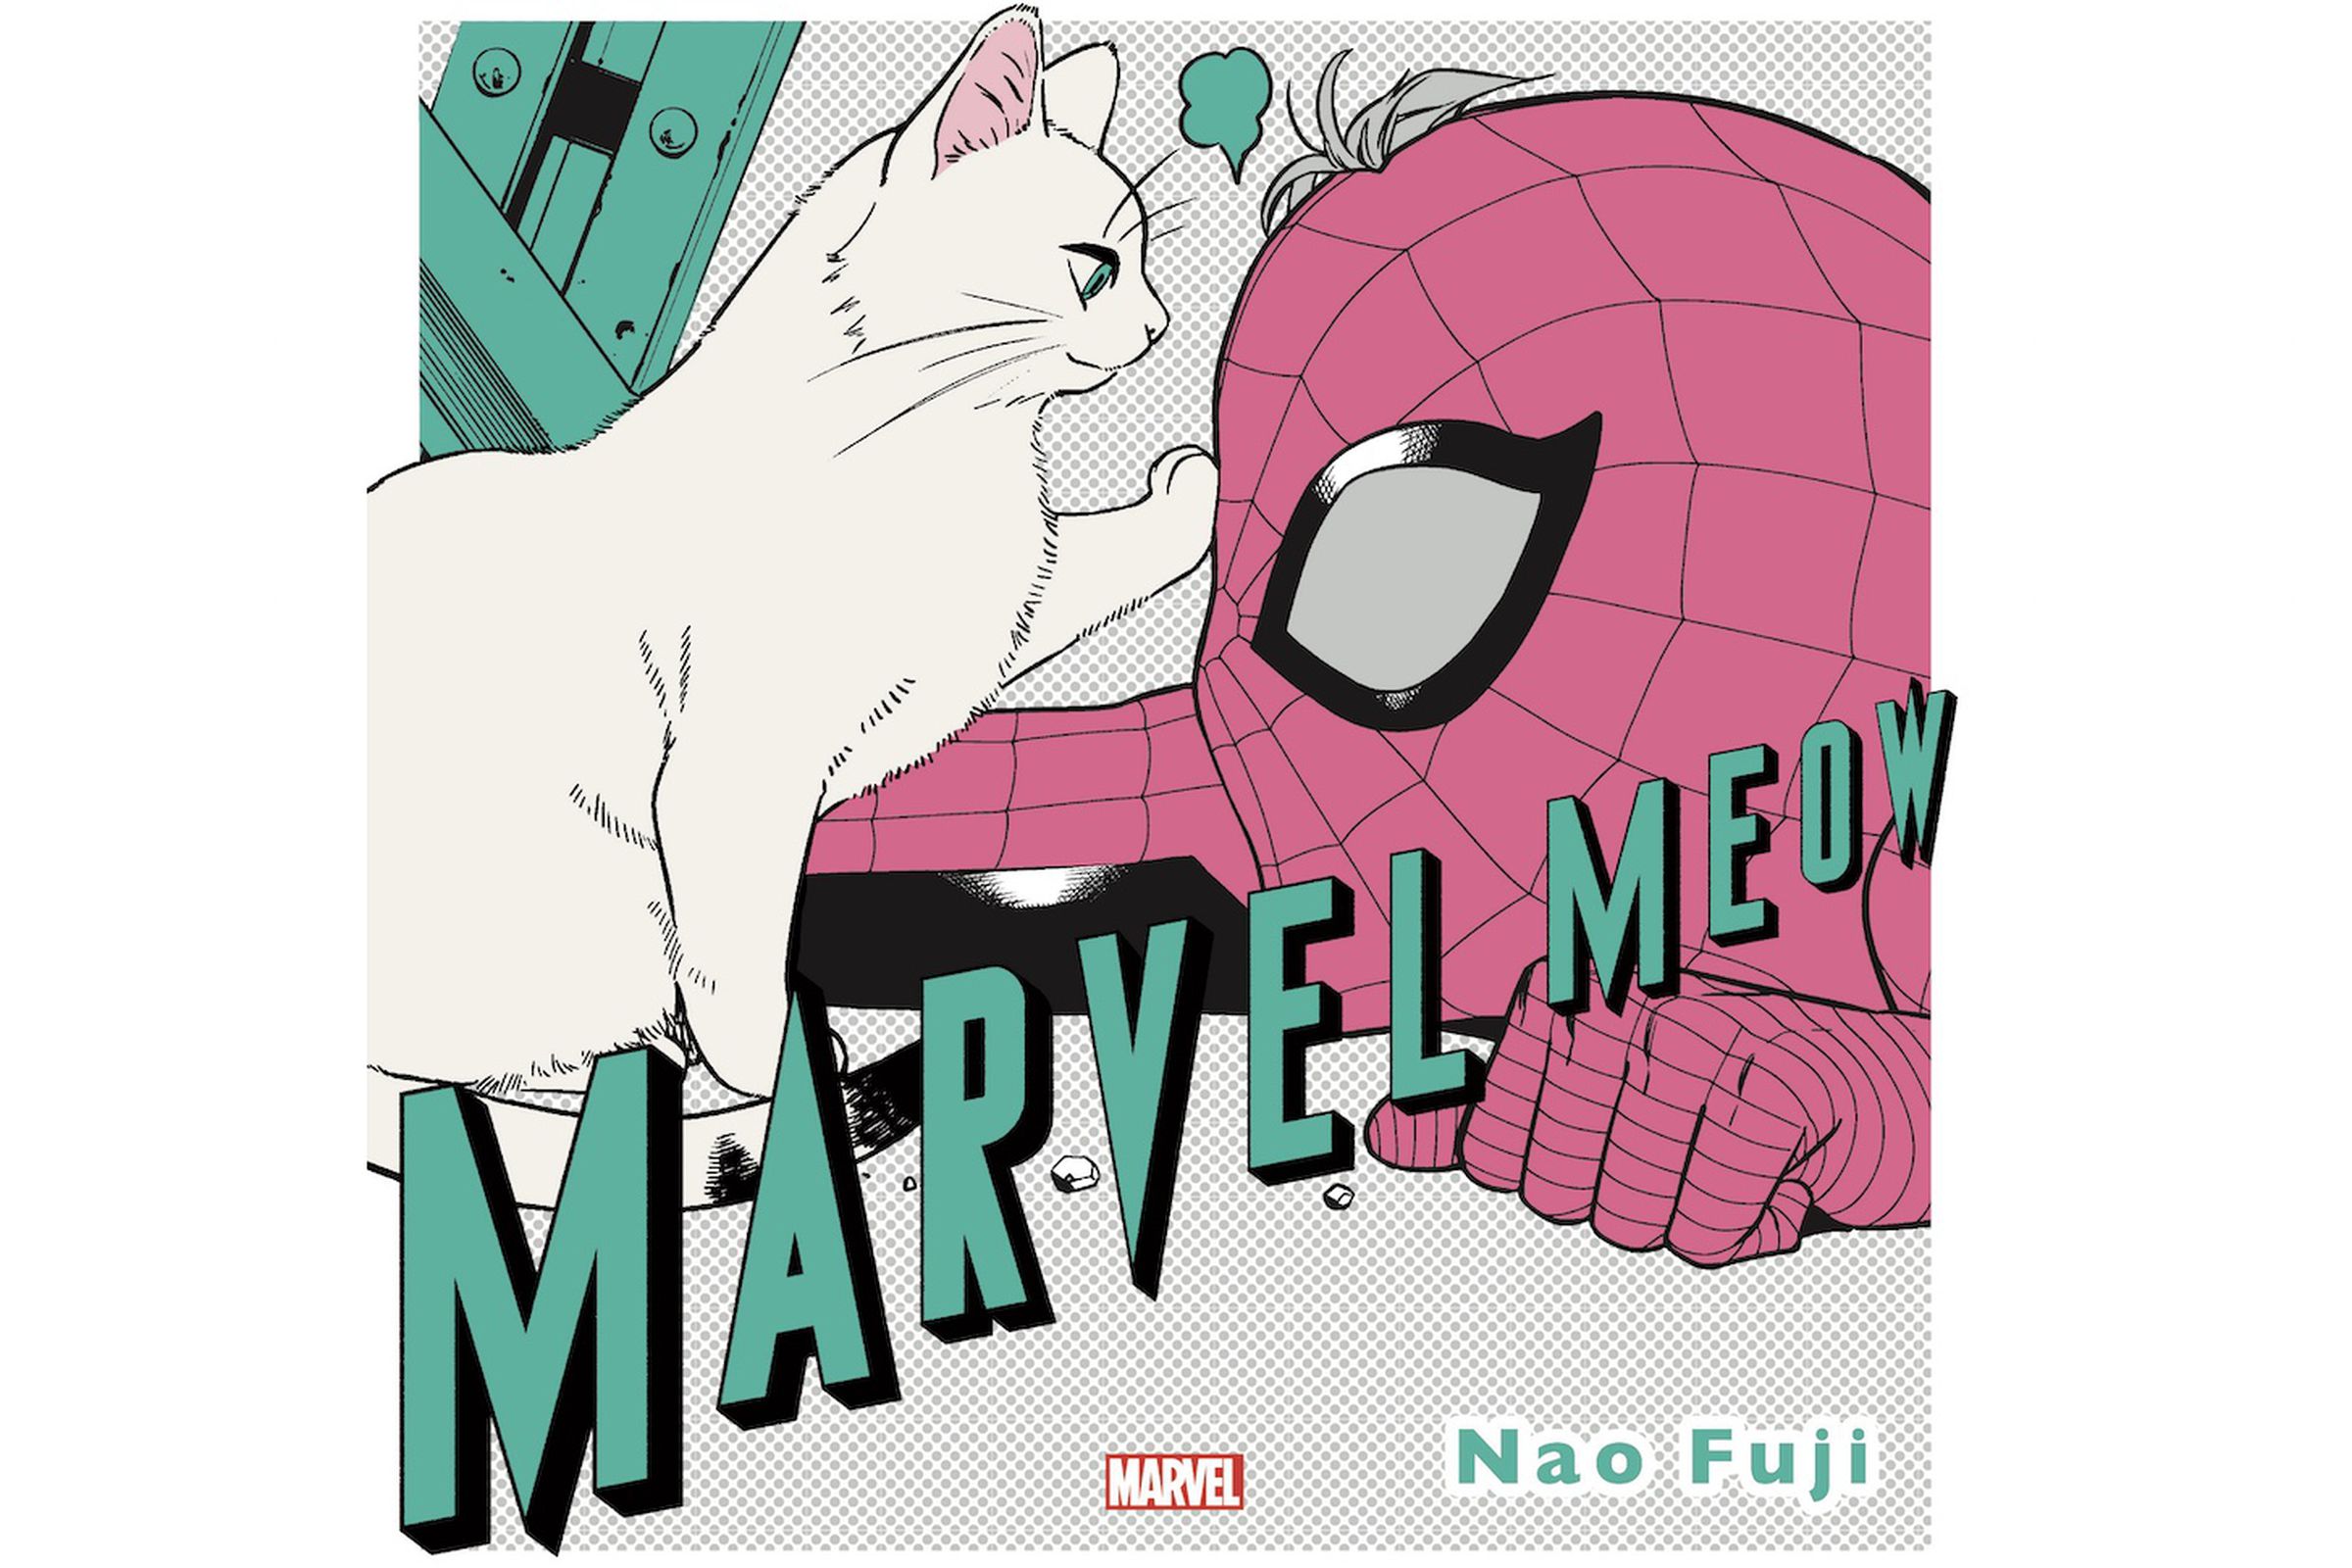 Marvel Meow, starring Chewie.